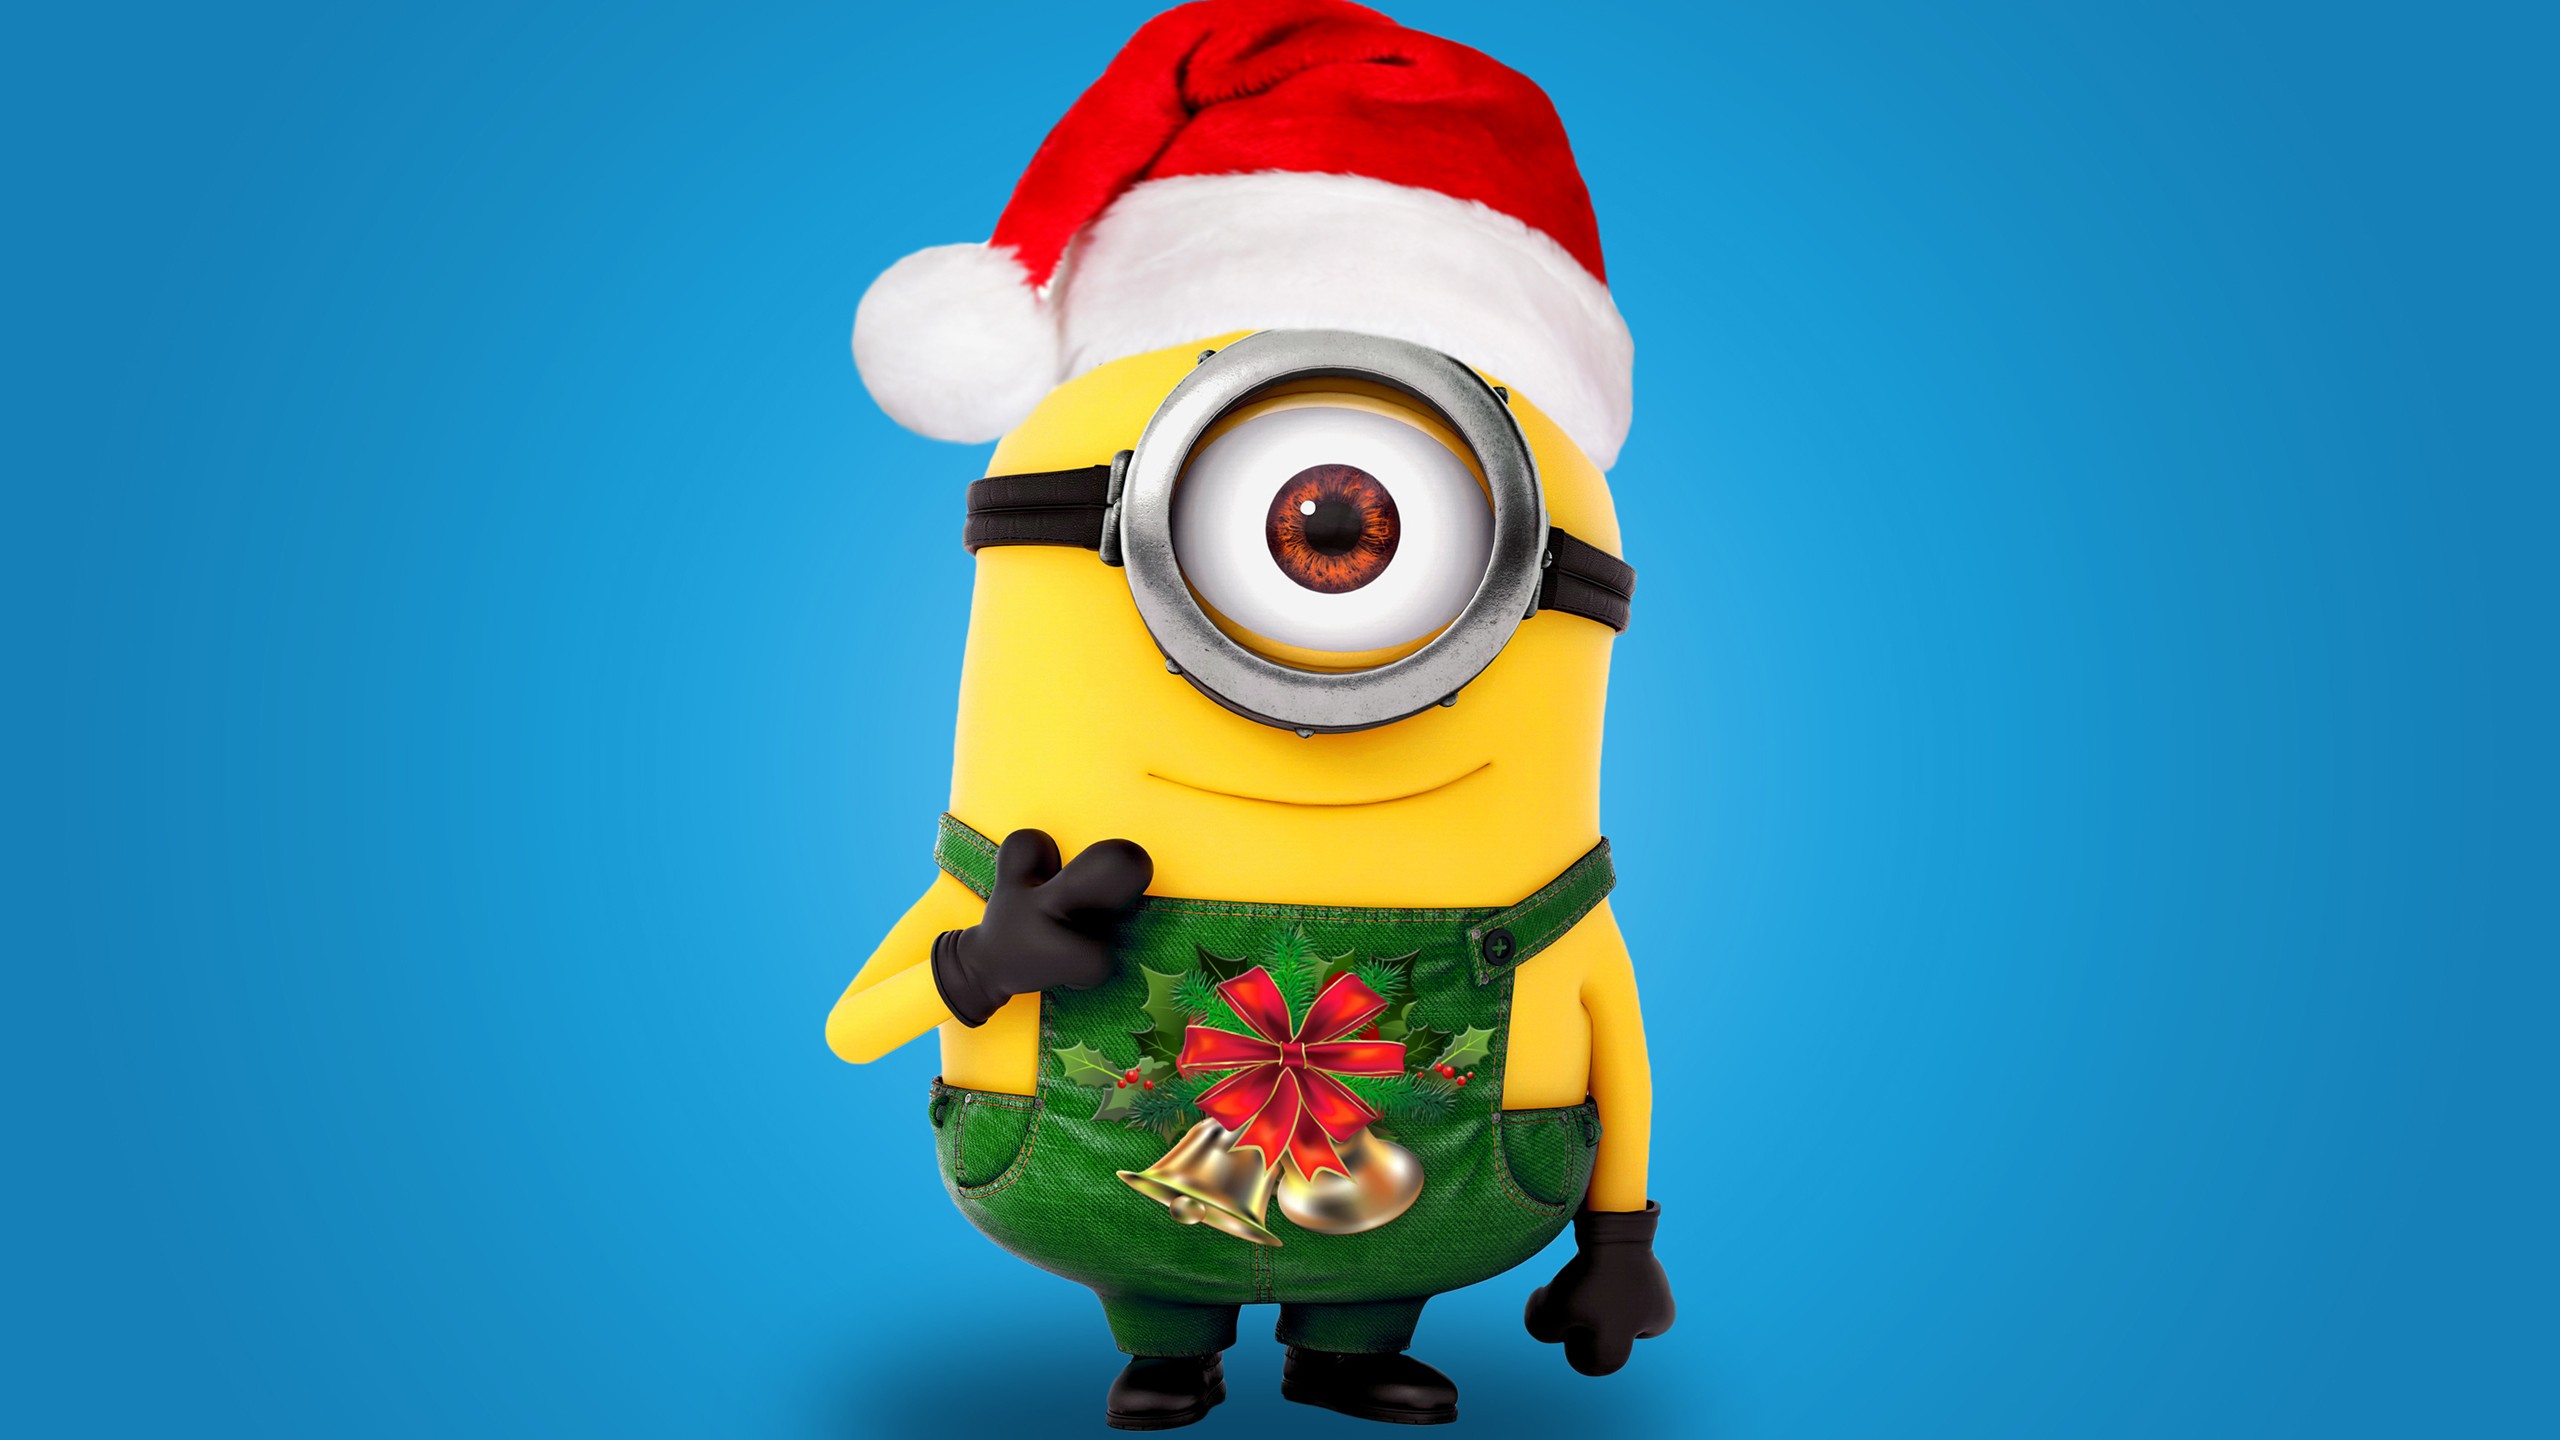 General 2560x1440 minions Christmas blue background Santa hats simple background movie characters Universal Pictures